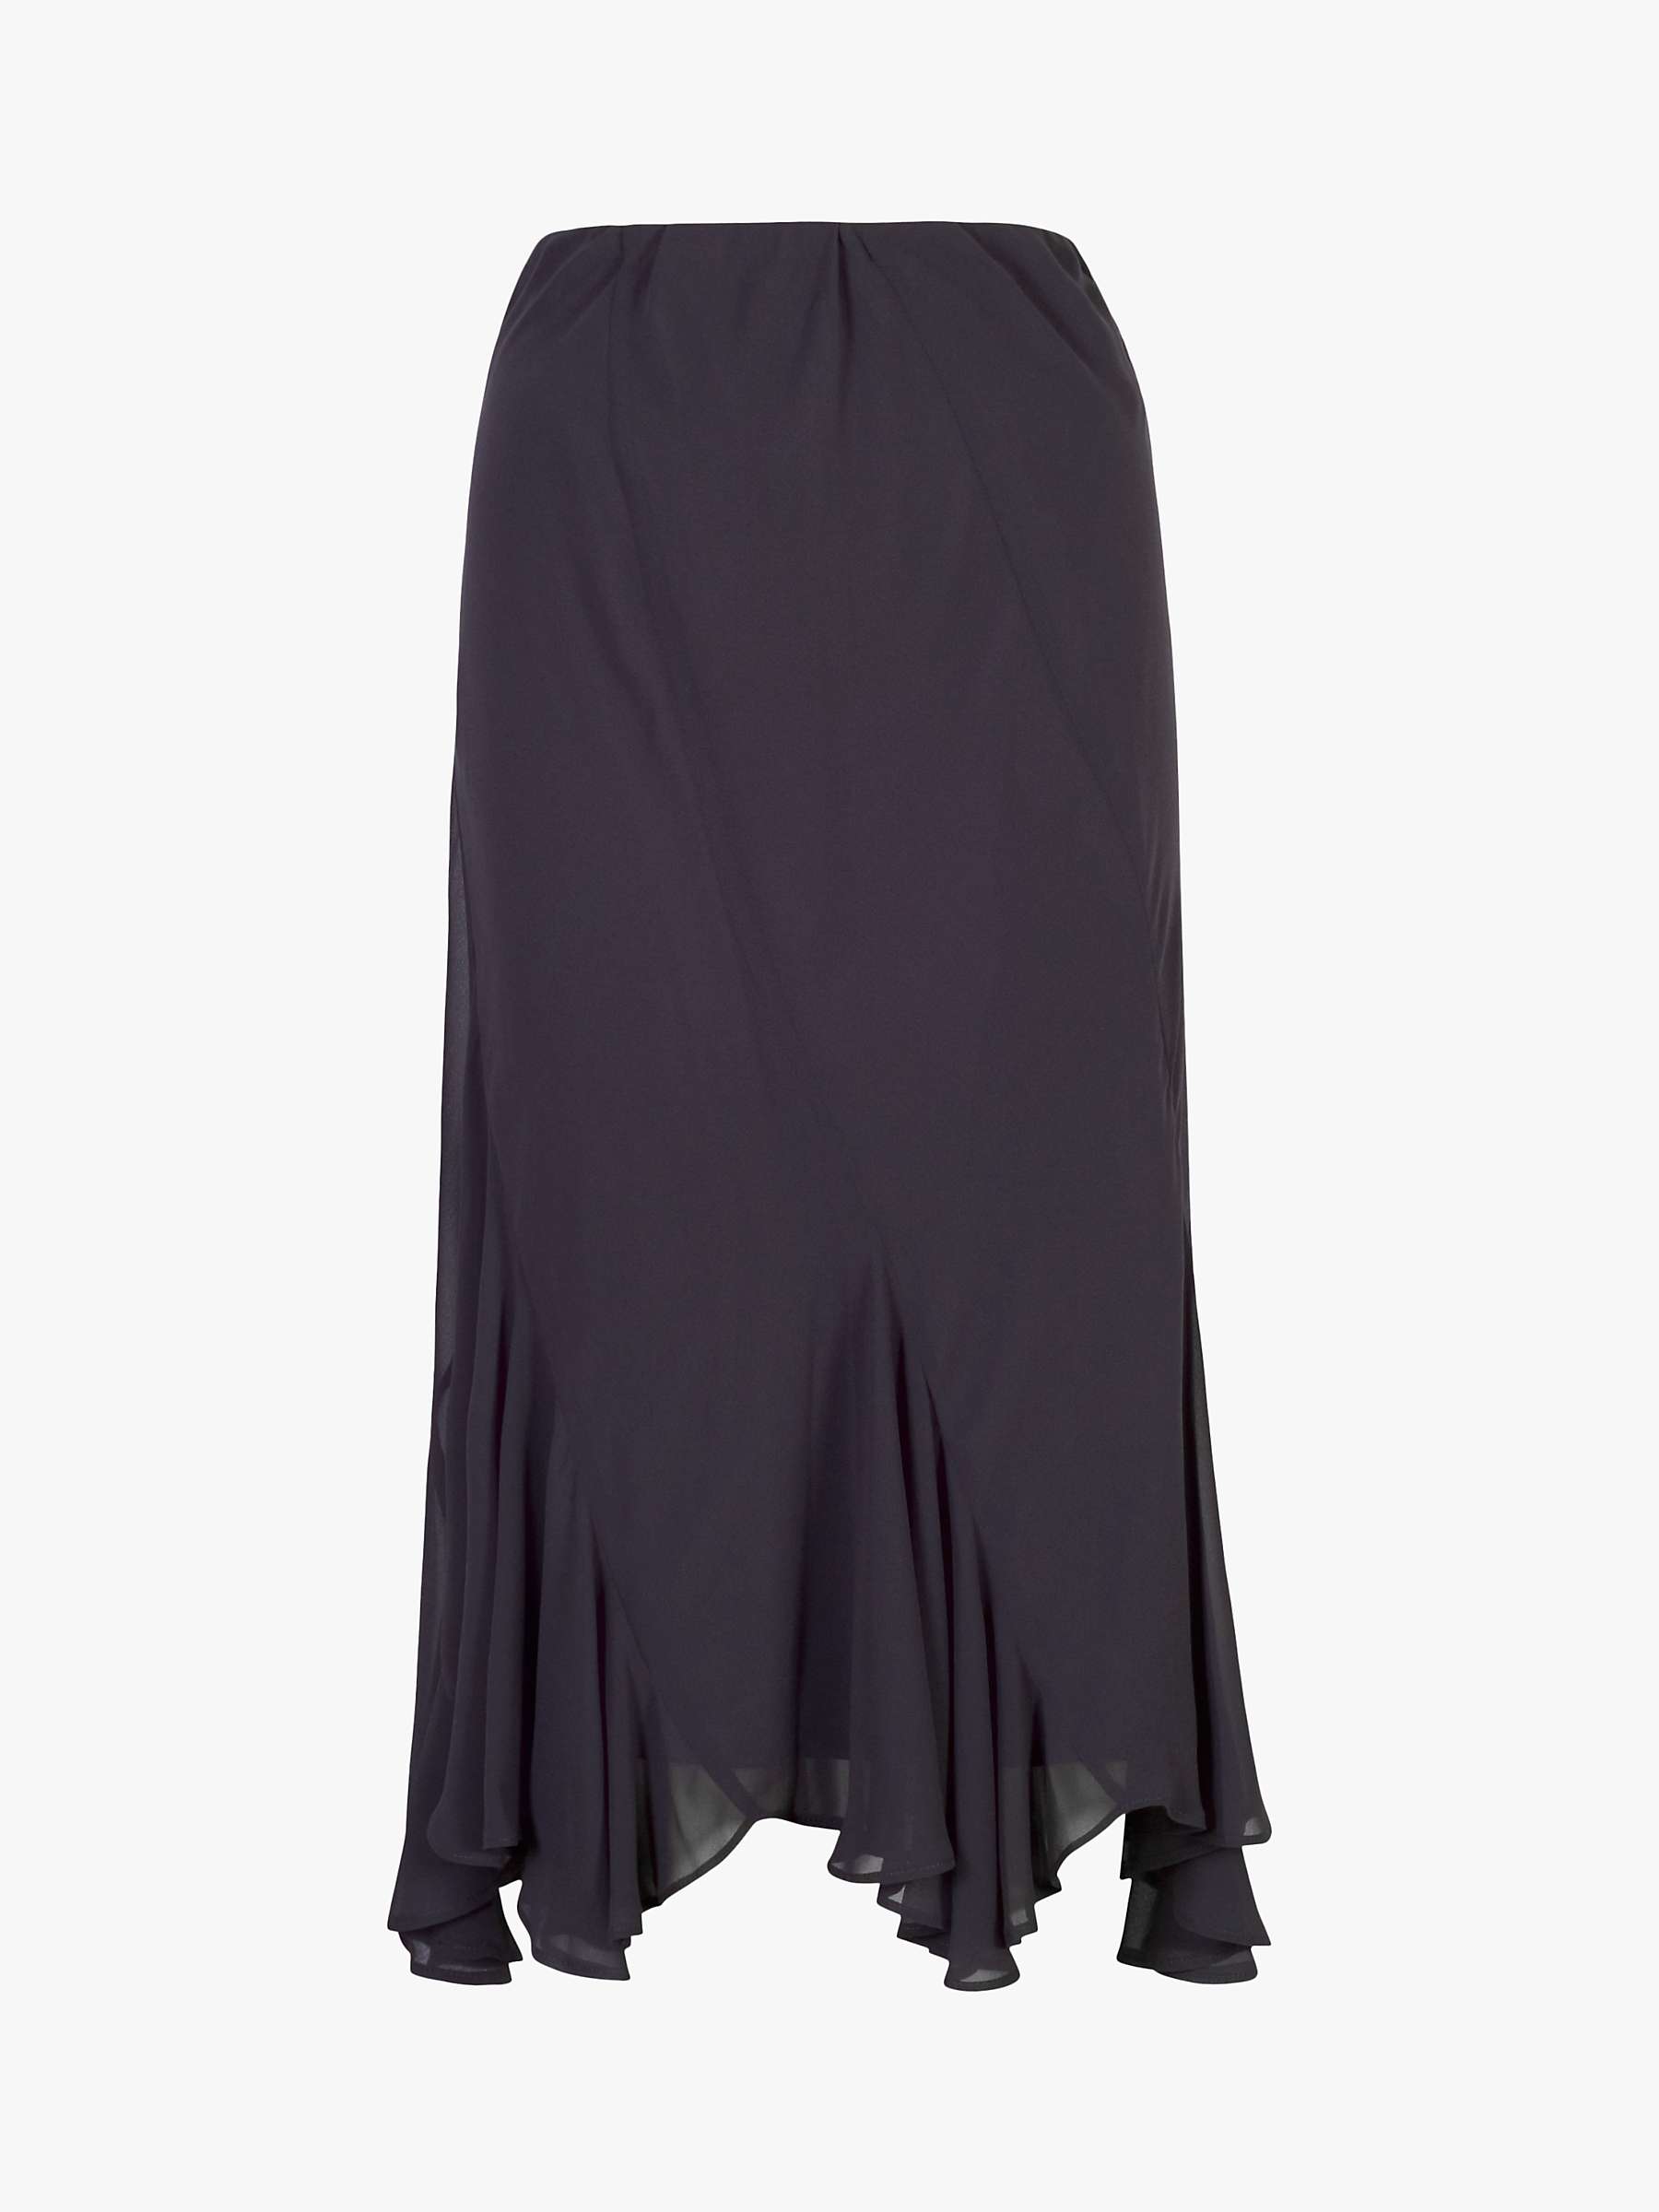 Buy Chesca Curved Skirt Online at johnlewis.com